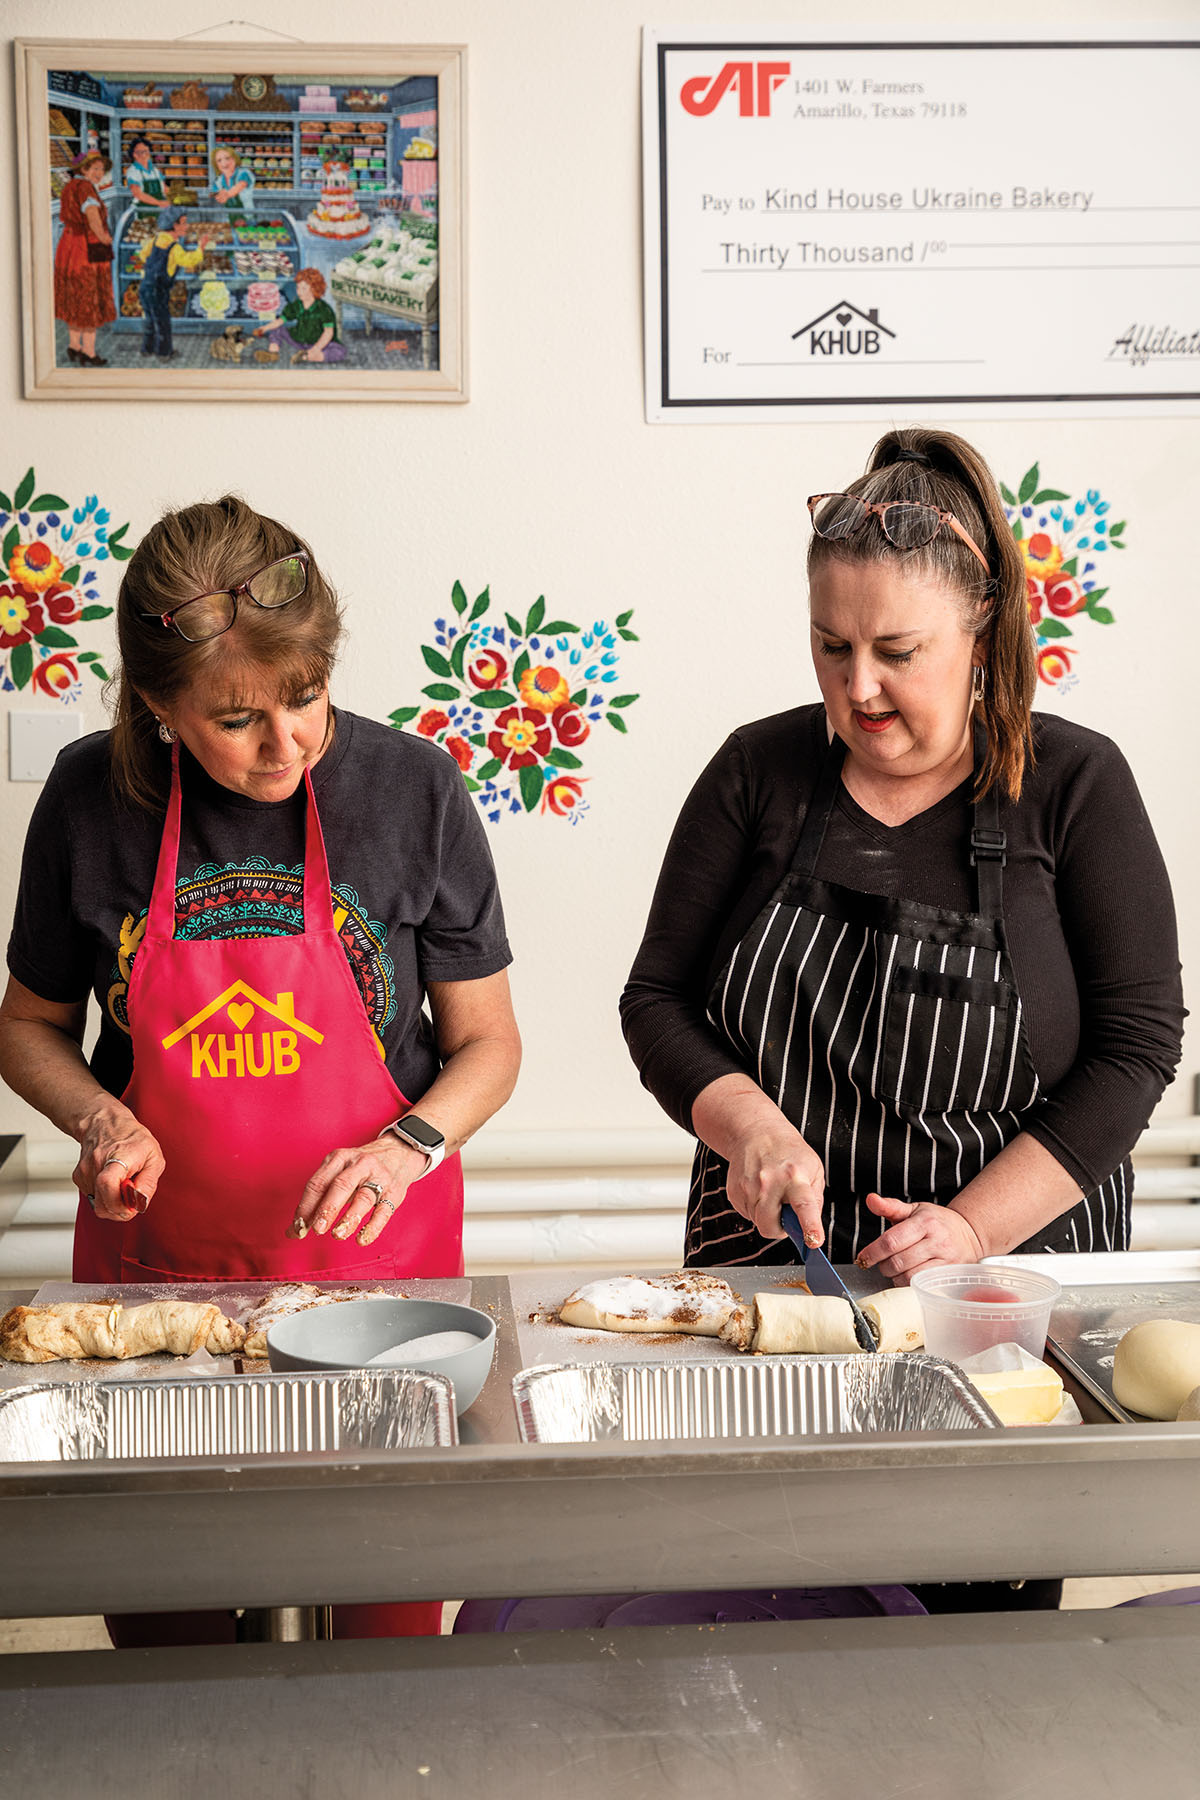 Two women in aprons work with dough and bowls of sugar on a work surface